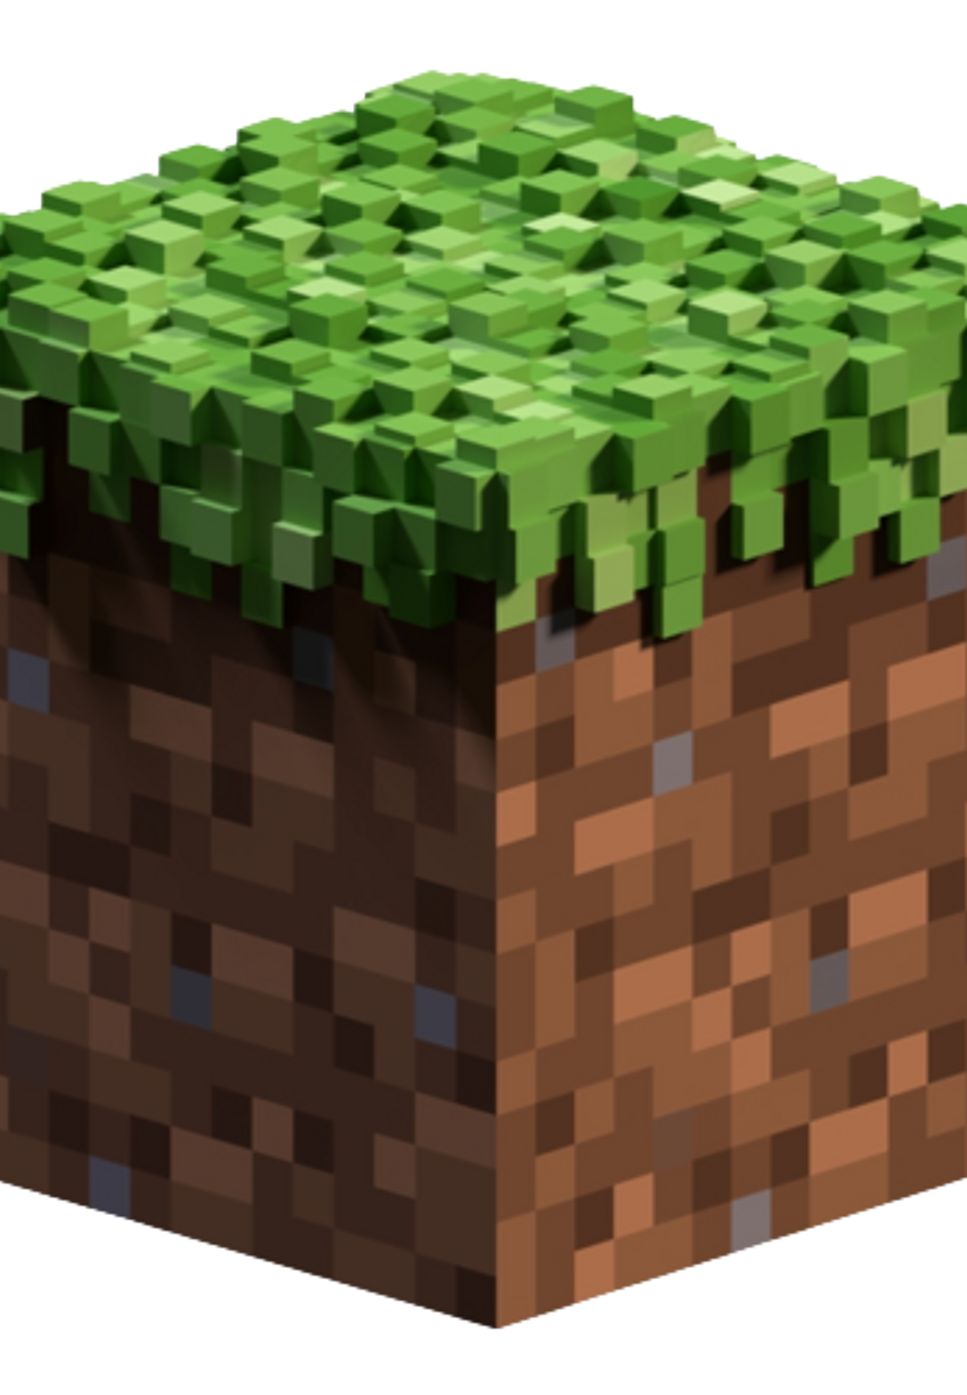 C418 - Wet Hands by SheetMusicSimply